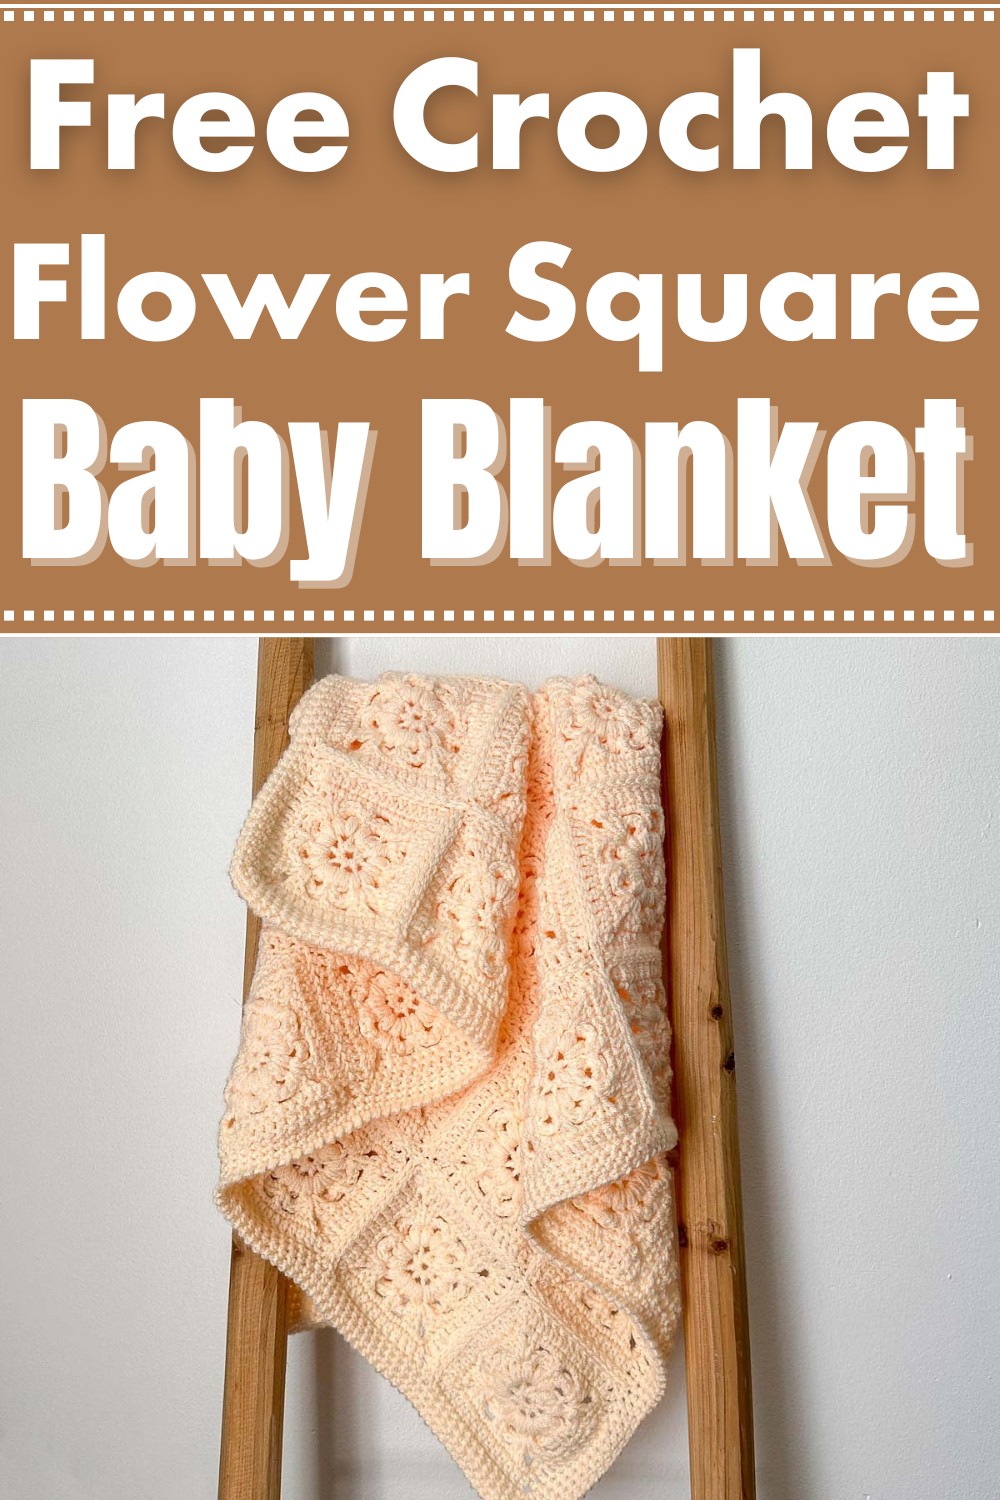 Fountain Flower Square Baby Blanket